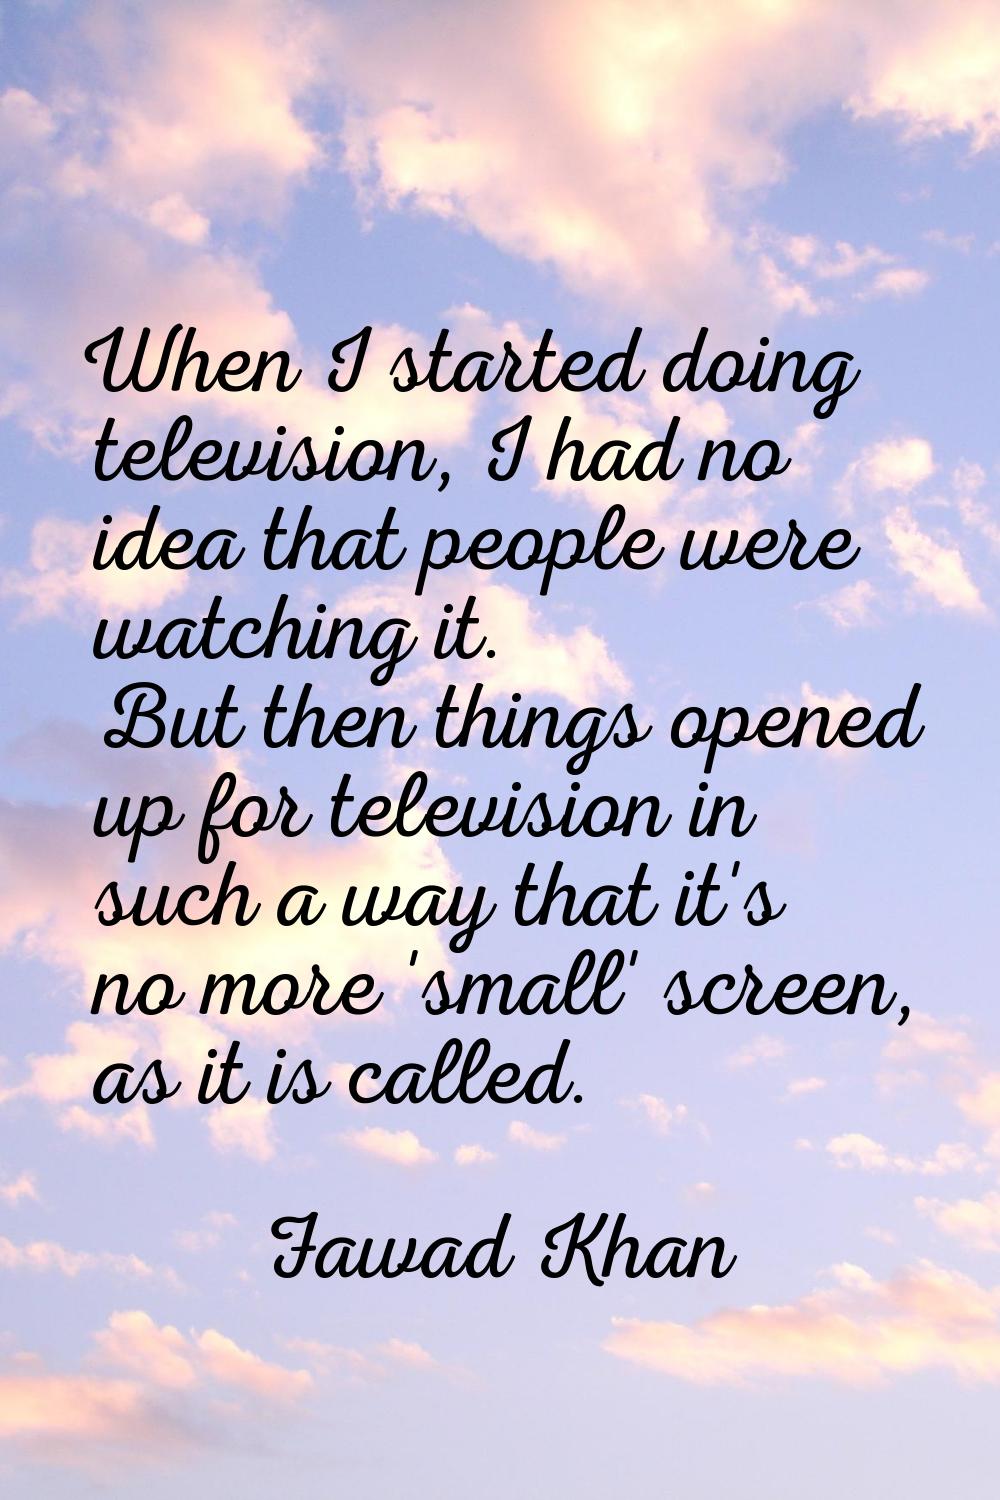 When I started doing television, I had no idea that people were watching it. But then things opened